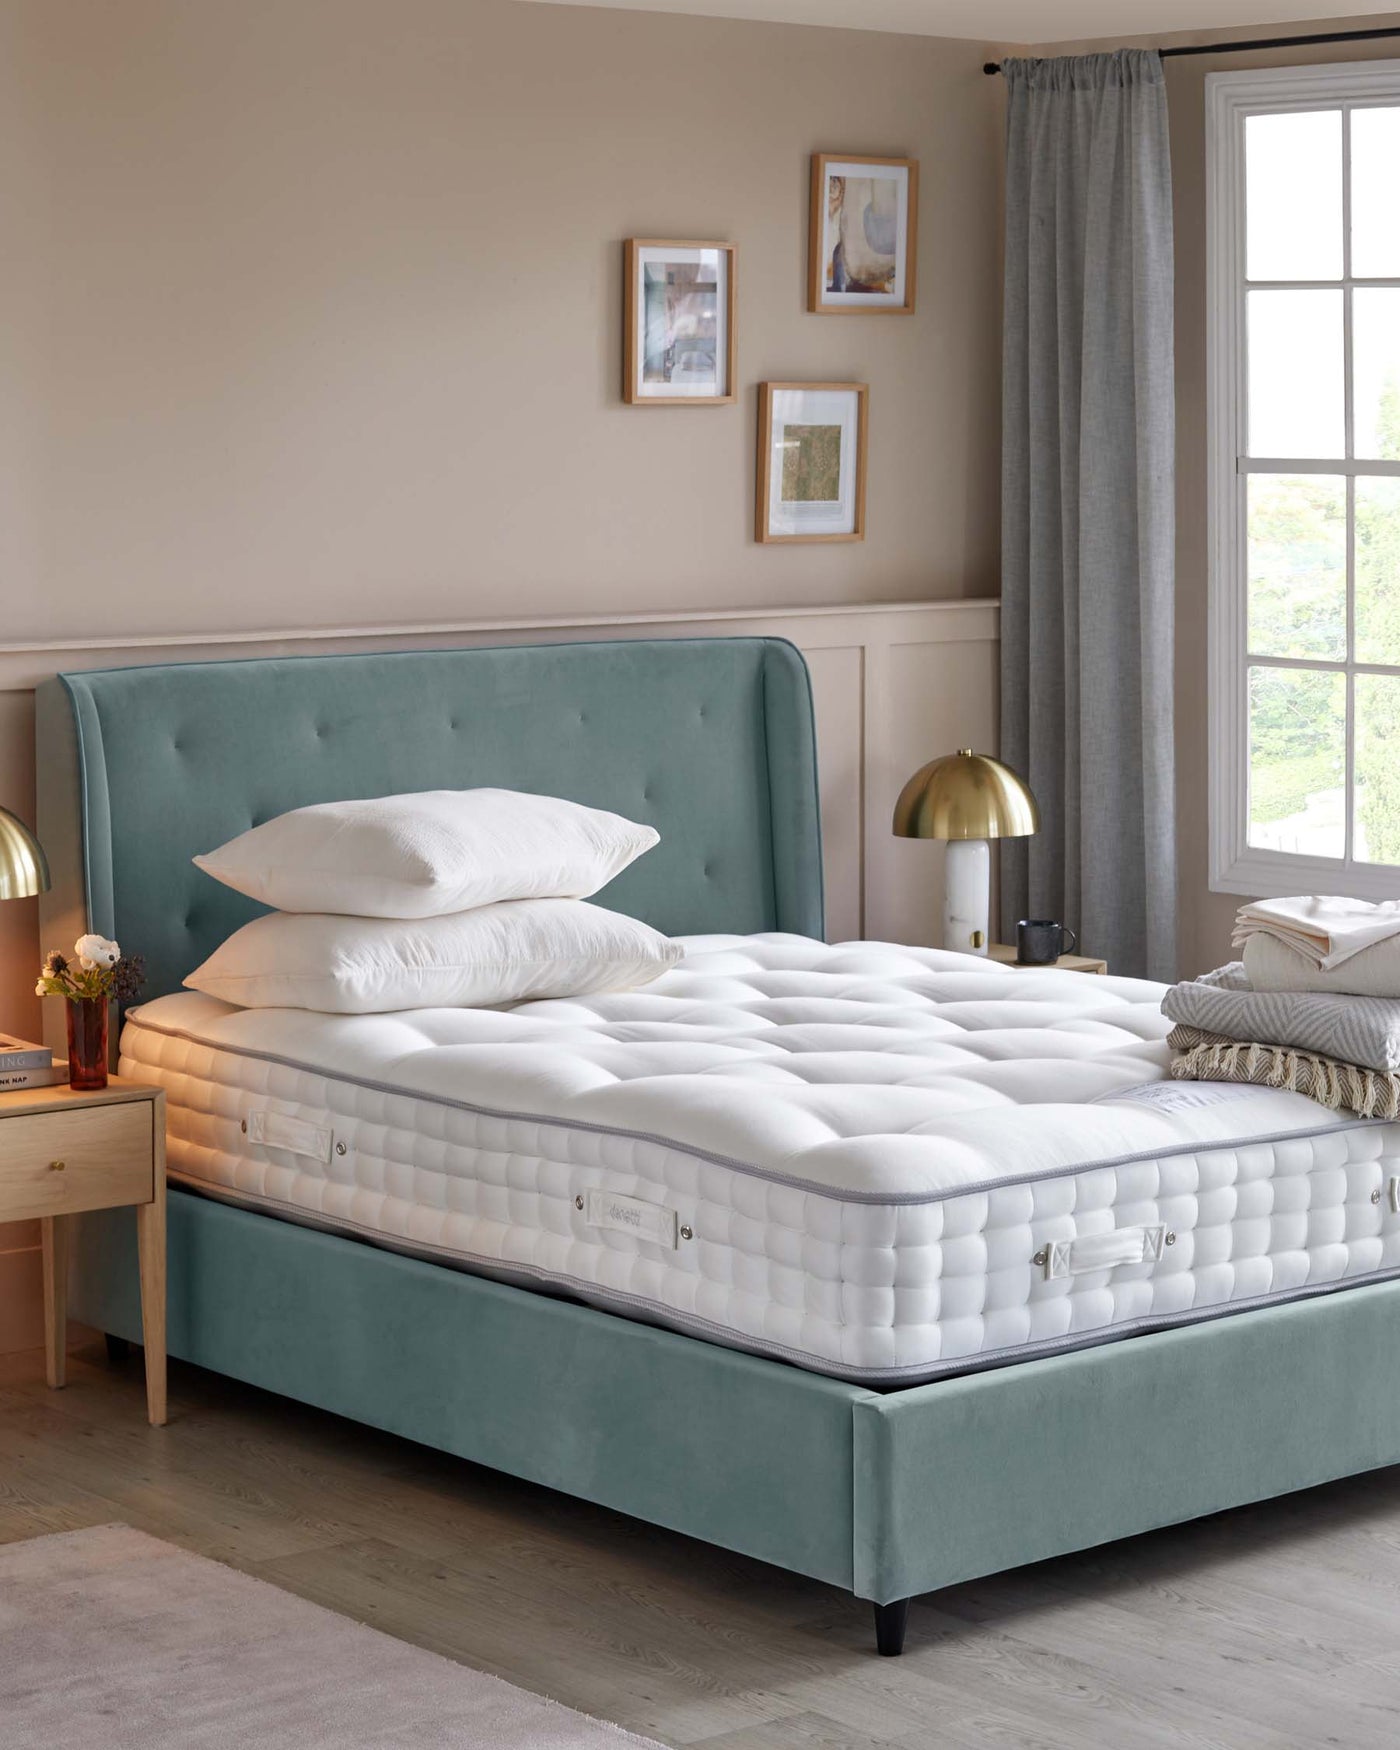 Luxurious teal upholstered bed frame with buttoned headboard and plush white mattress, accompanied by a natural wood bedside table with a drawer.